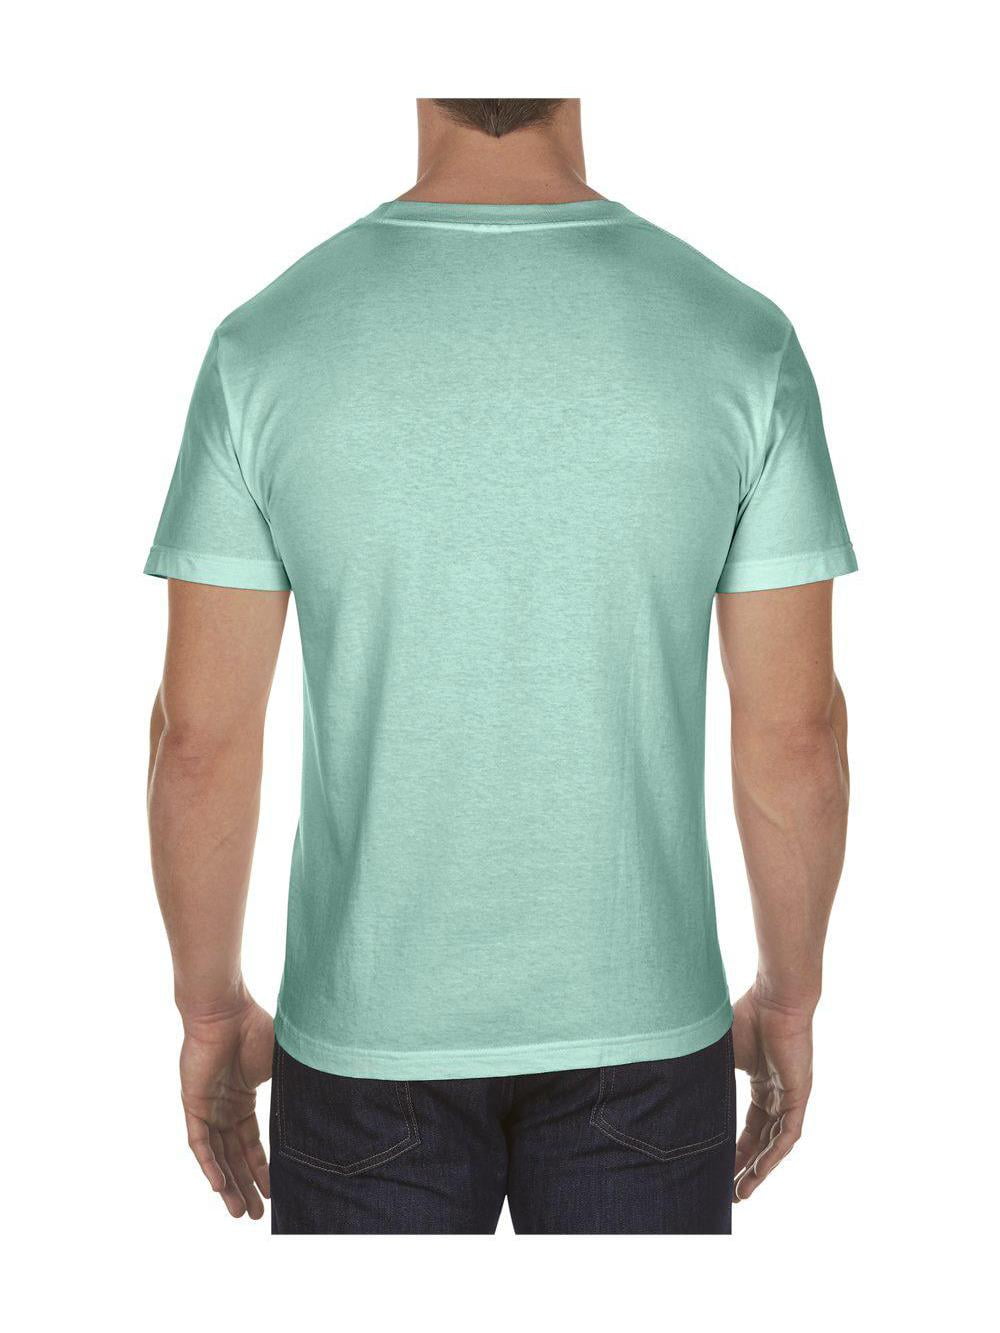 ALSTYLE Classic T-Shirt 1301 Forest Green S